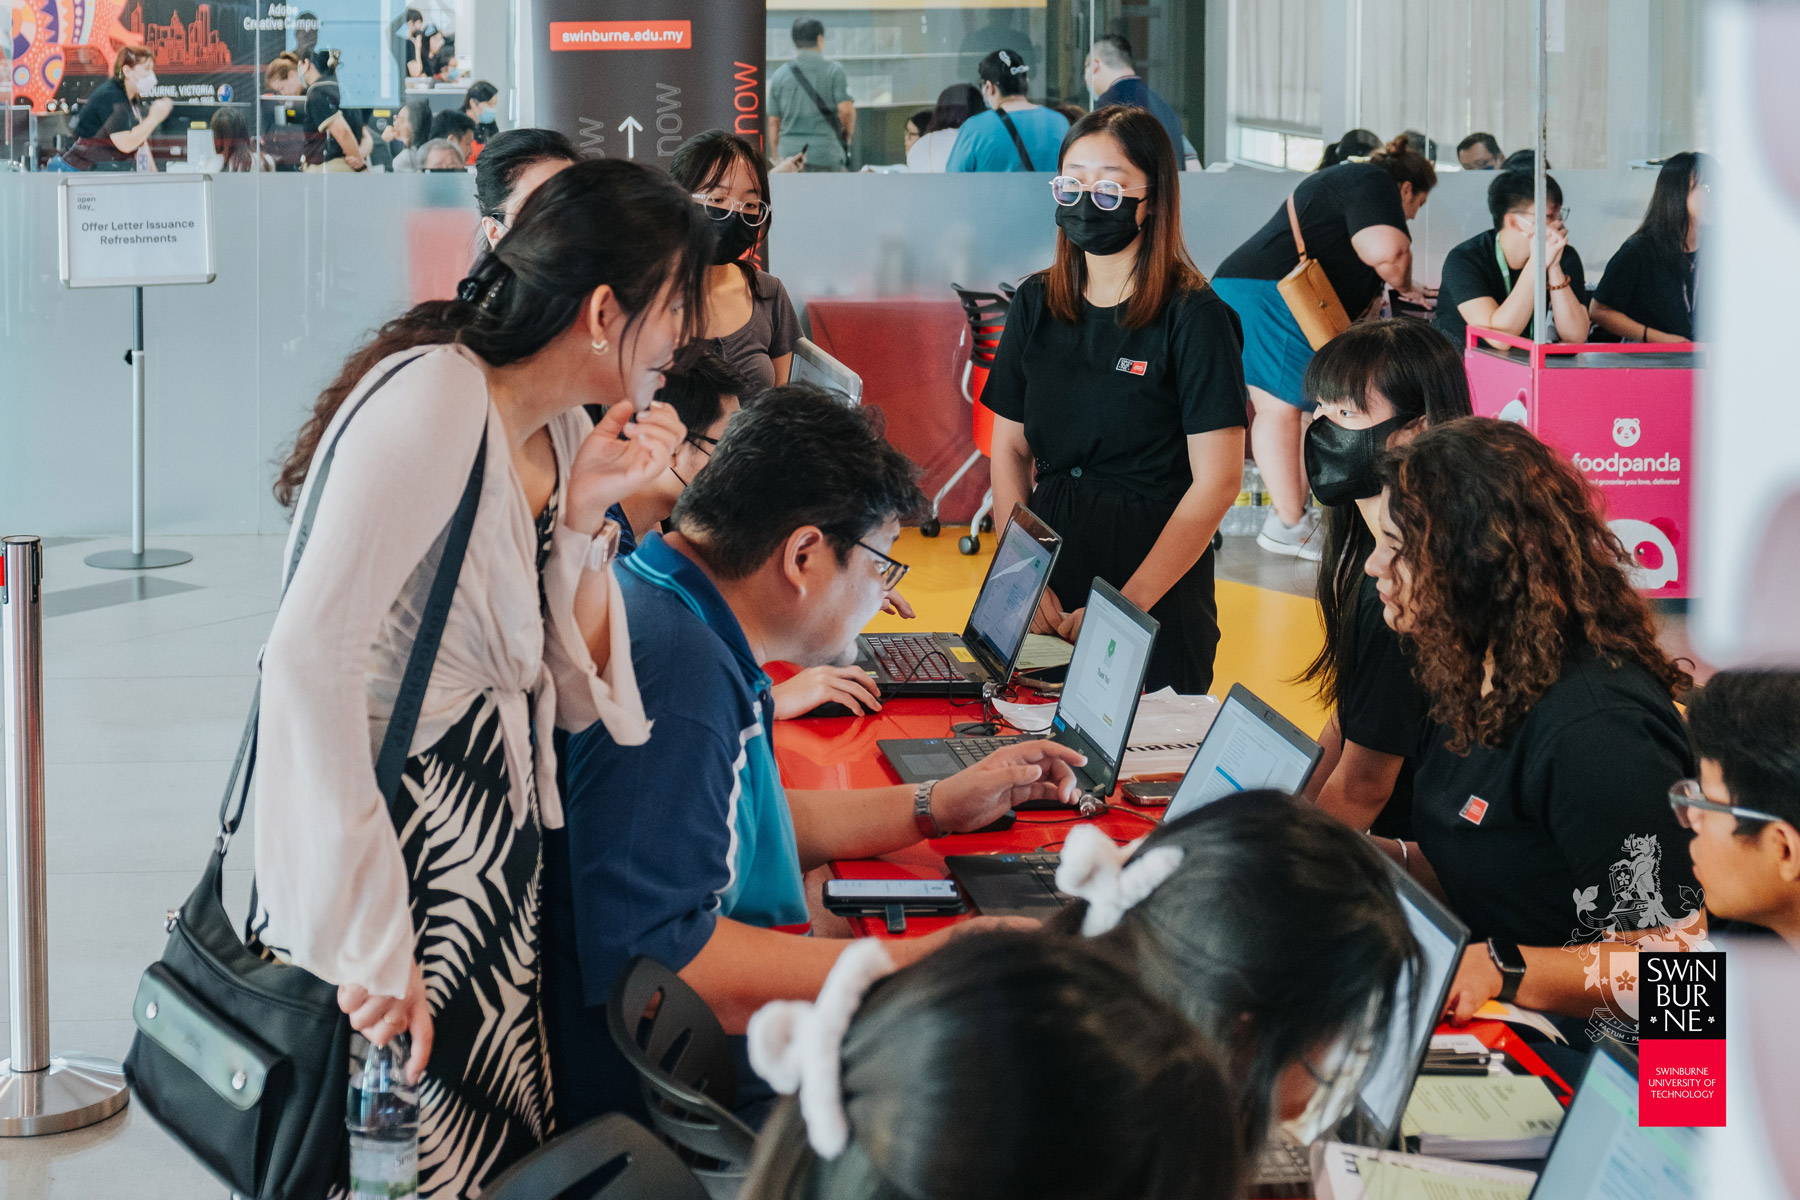 Swinburne Sarawak’s Open Day offers visitors the opportunity to meet one-on-one with education counsellors and academics to explore all the Swinburne Sarawak has to offer.